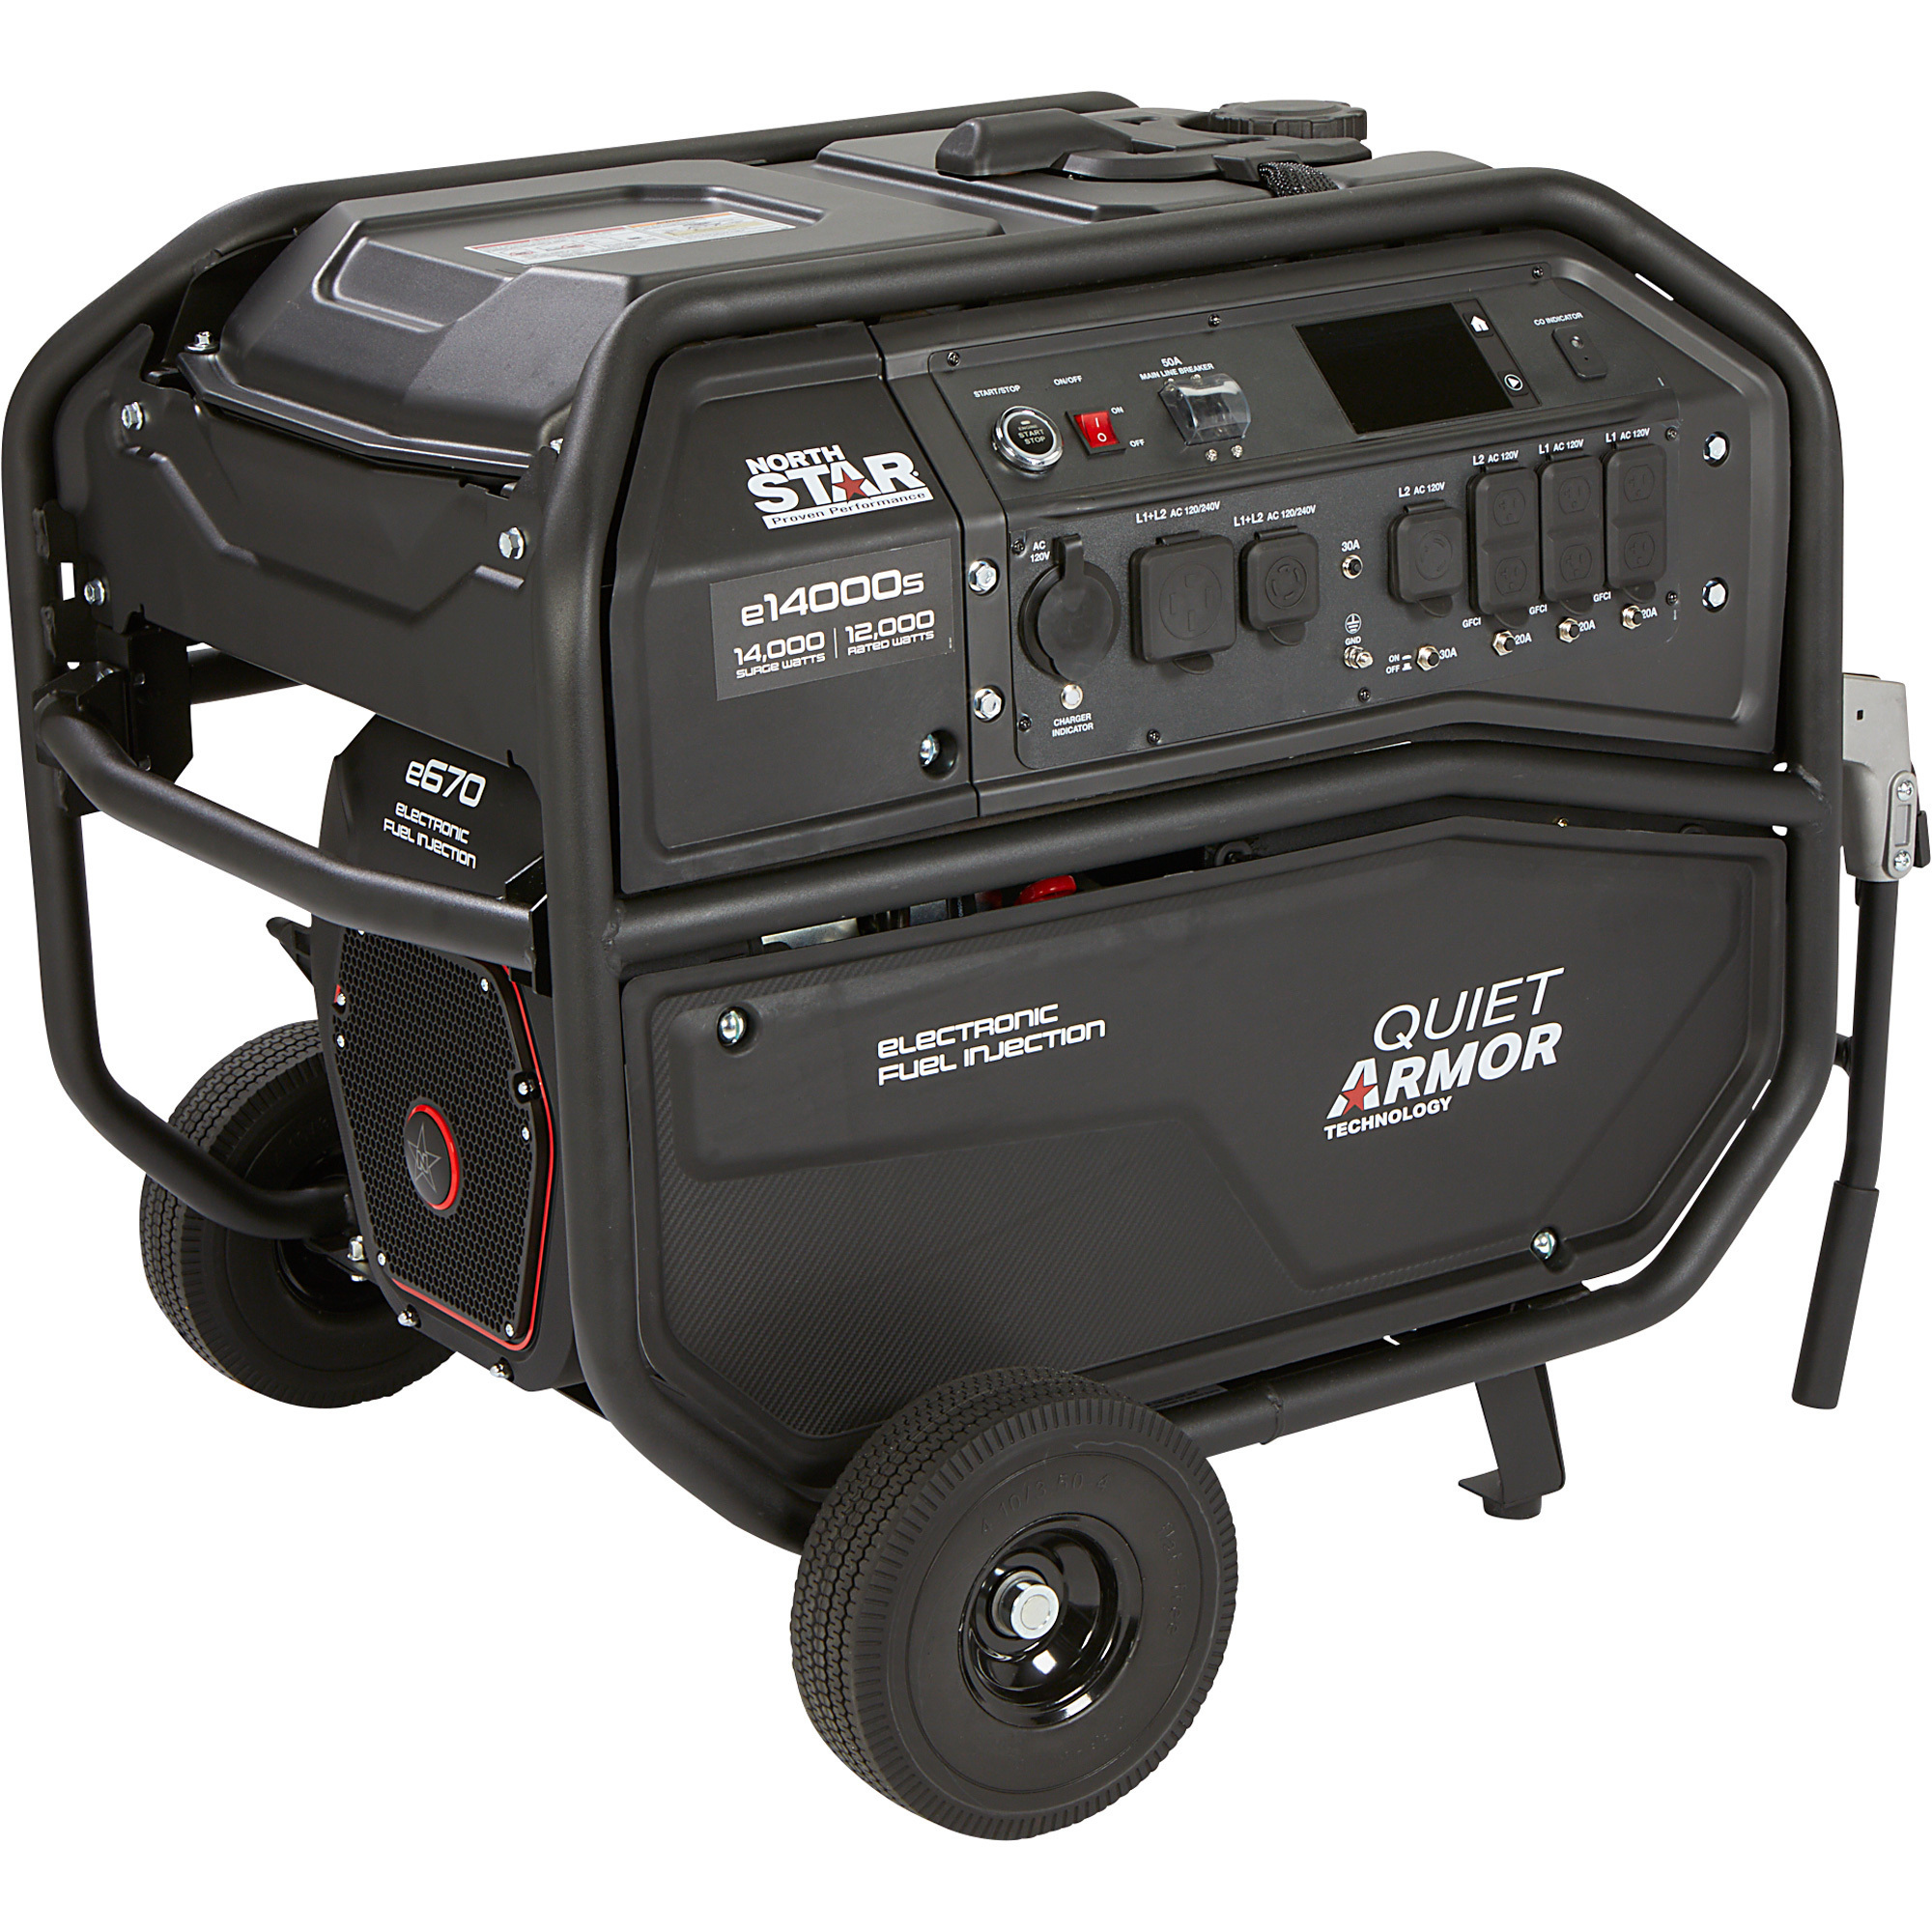 NorthStar e14000s Commercial-Grade EFI Portable Generator with Electric Start, 14,000 Surge Watts, 12,000 Rated Watts, Model 1654405